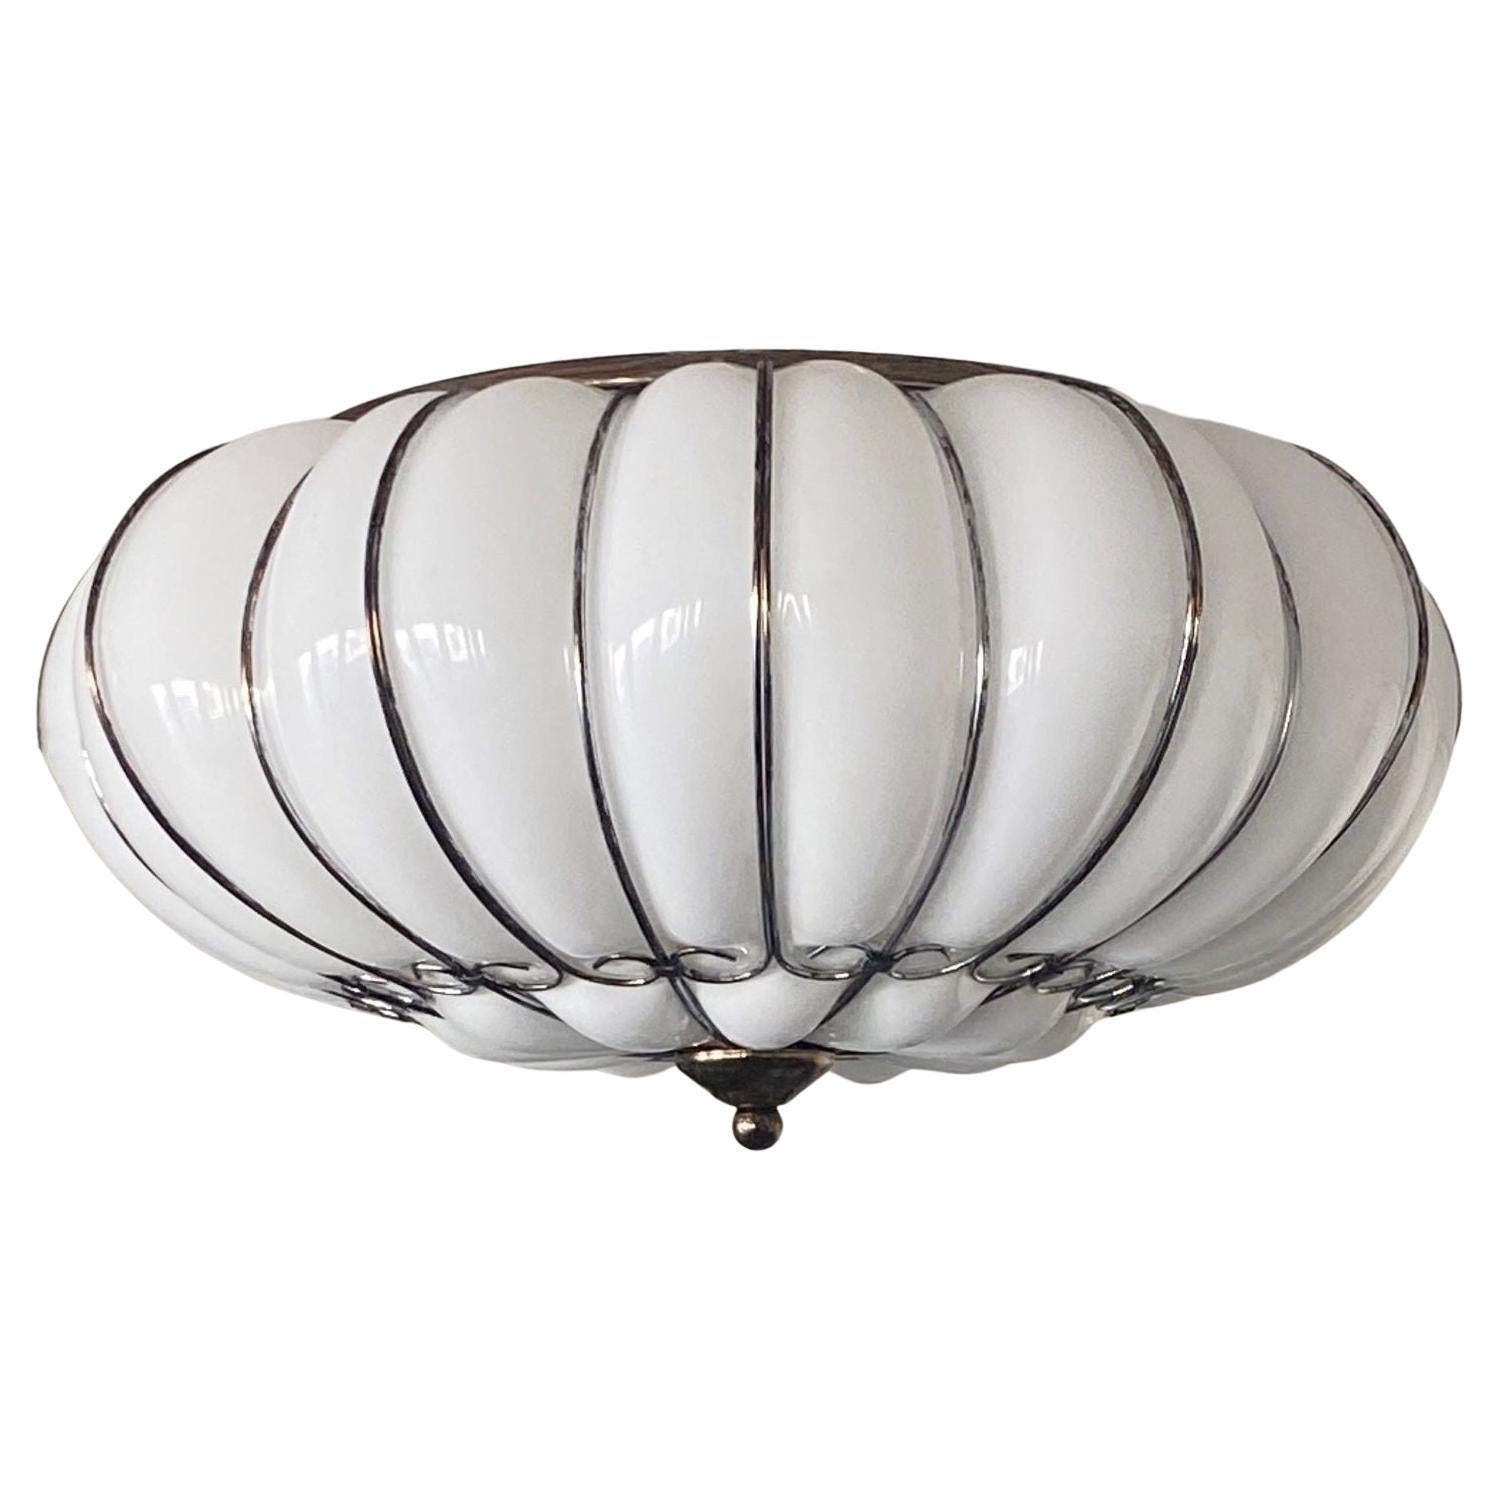 A pair of Modern Classic Venetian Murano glass four-light ceiling lights, Italy, early 21st-century. Hand-blown Murano milk gass beautifuly caged in patinated metal frame. Both pieces in excellent condition, rewired to medern standards. Each flush